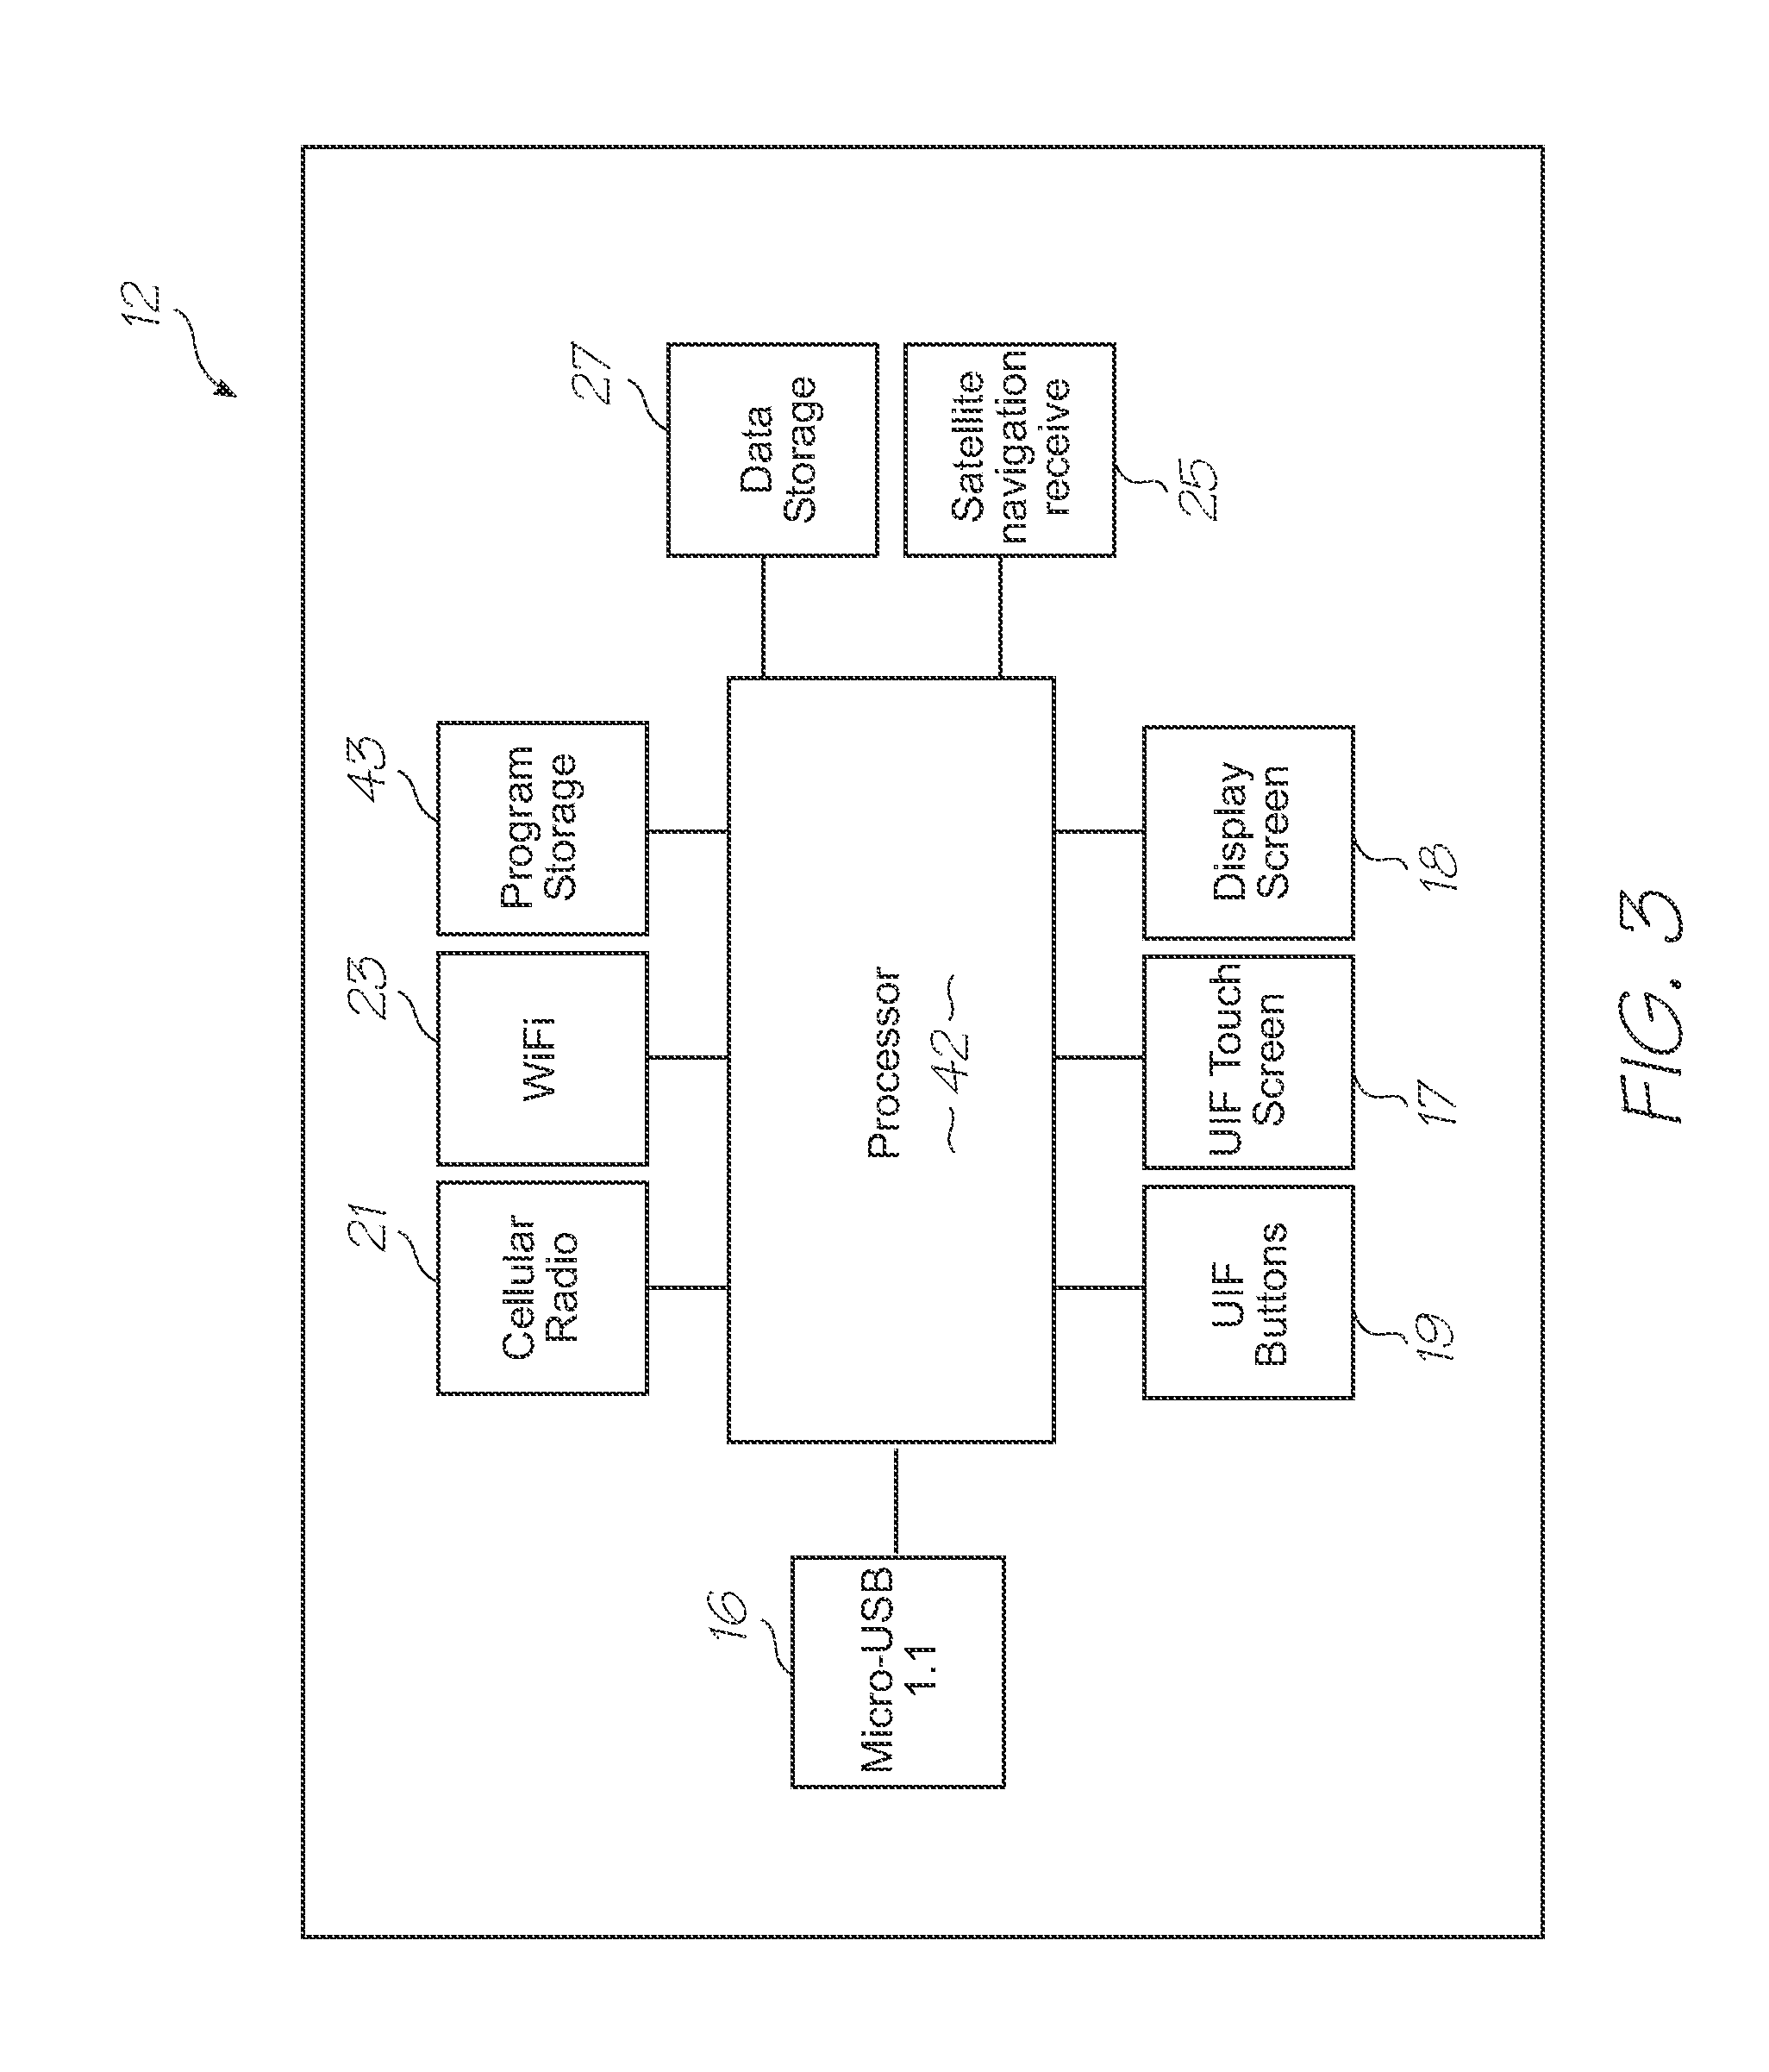 Loc device with hybridization chambers containing probes for electrochemiluminescent detection of target nucleic acid sequences in a fluid and calibration chamber containing probes sealed from the fluid